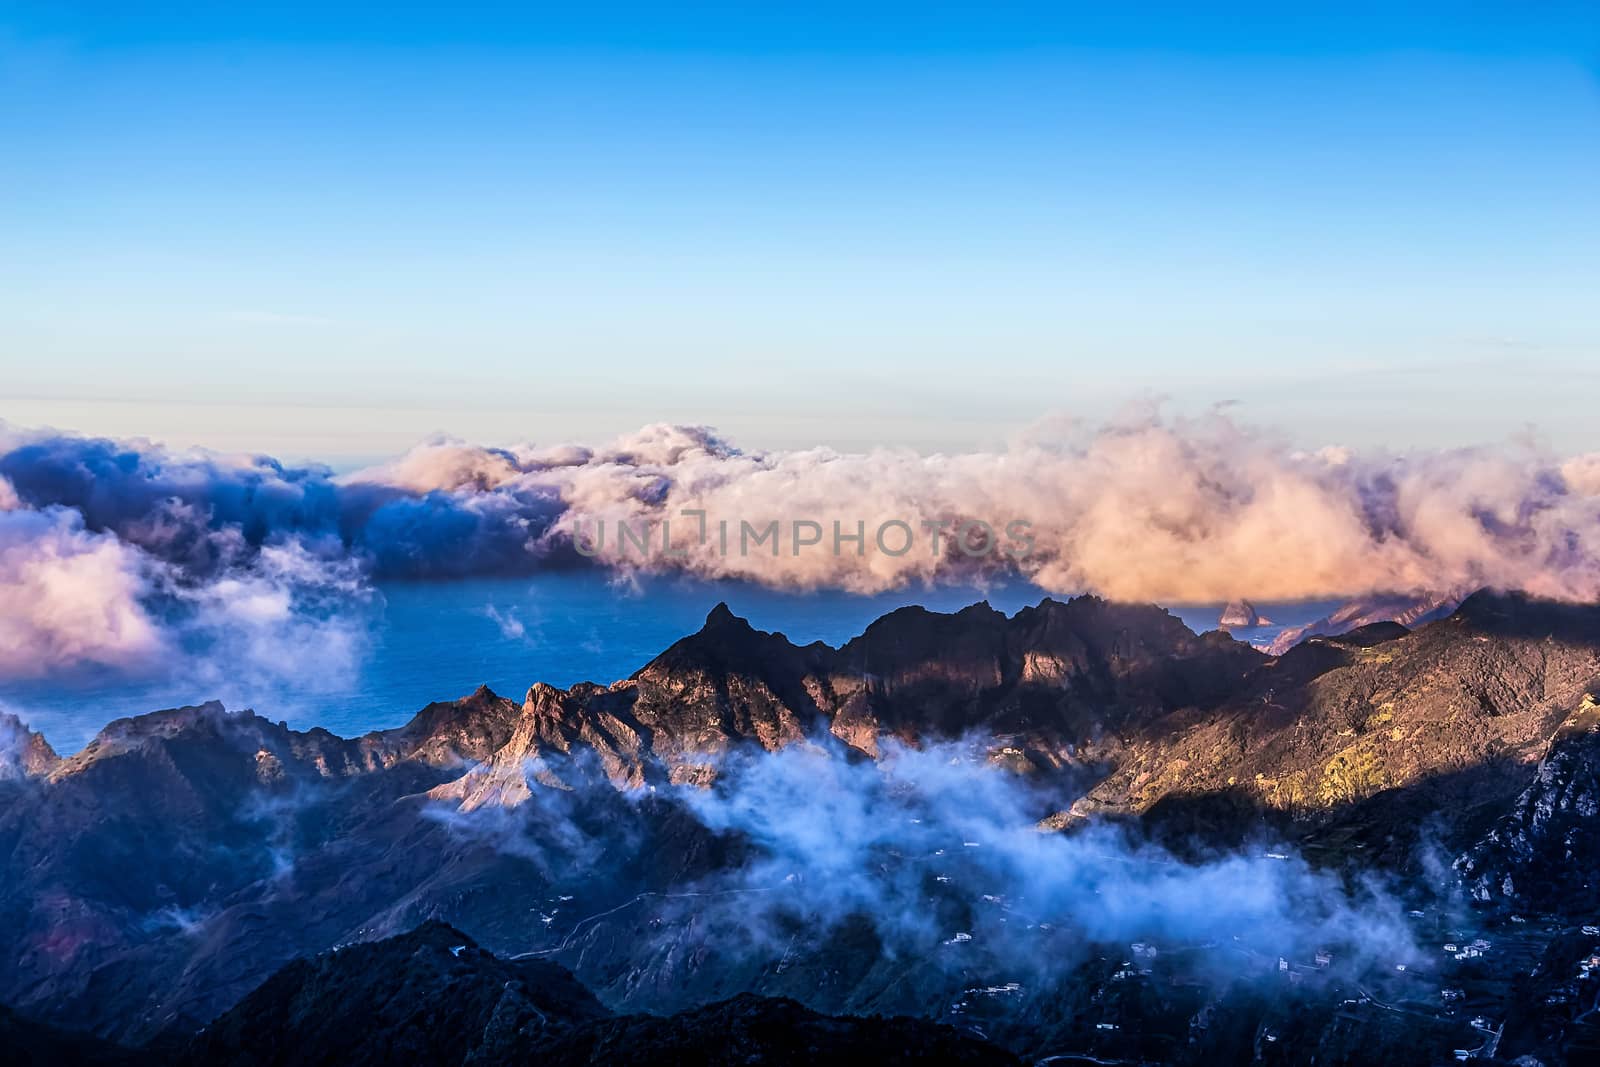 Mountains with white and pink clouds on blue sky landscape in Tenerife island, Spain at sunset